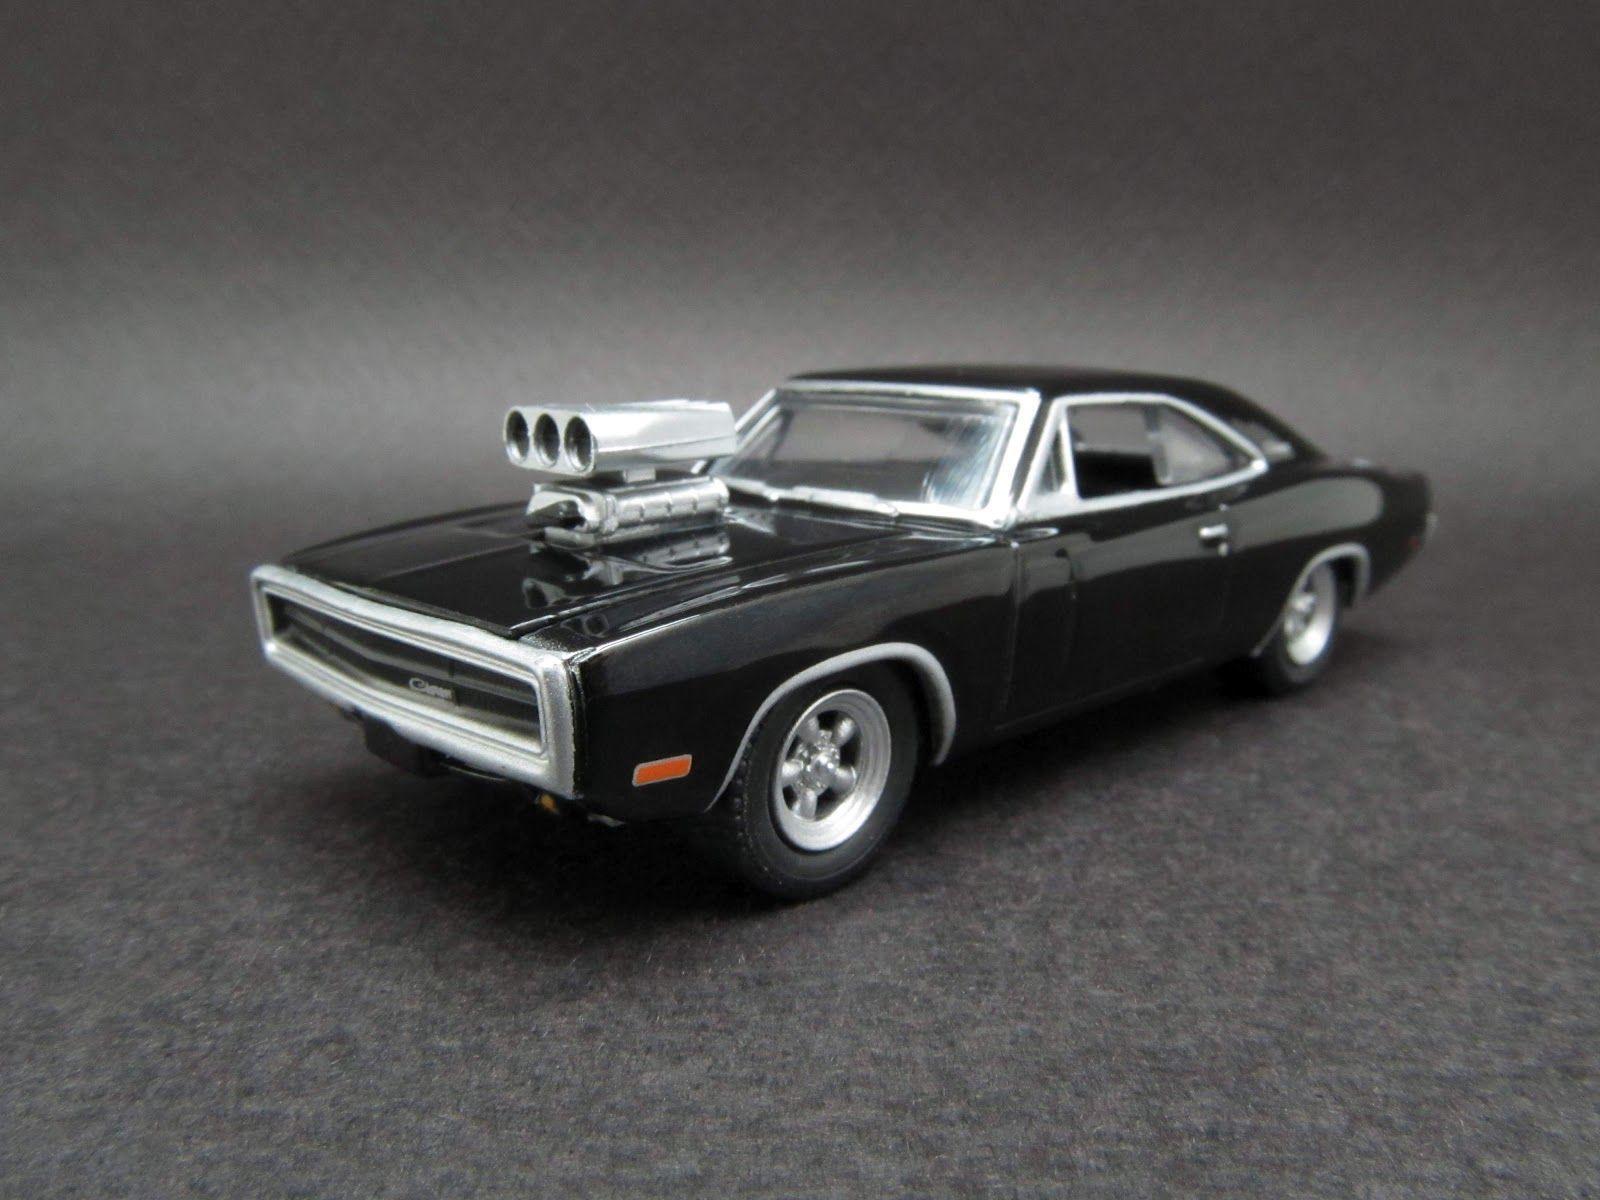 1970 Dodge Charger Wallpapers - Wallpaper Cave